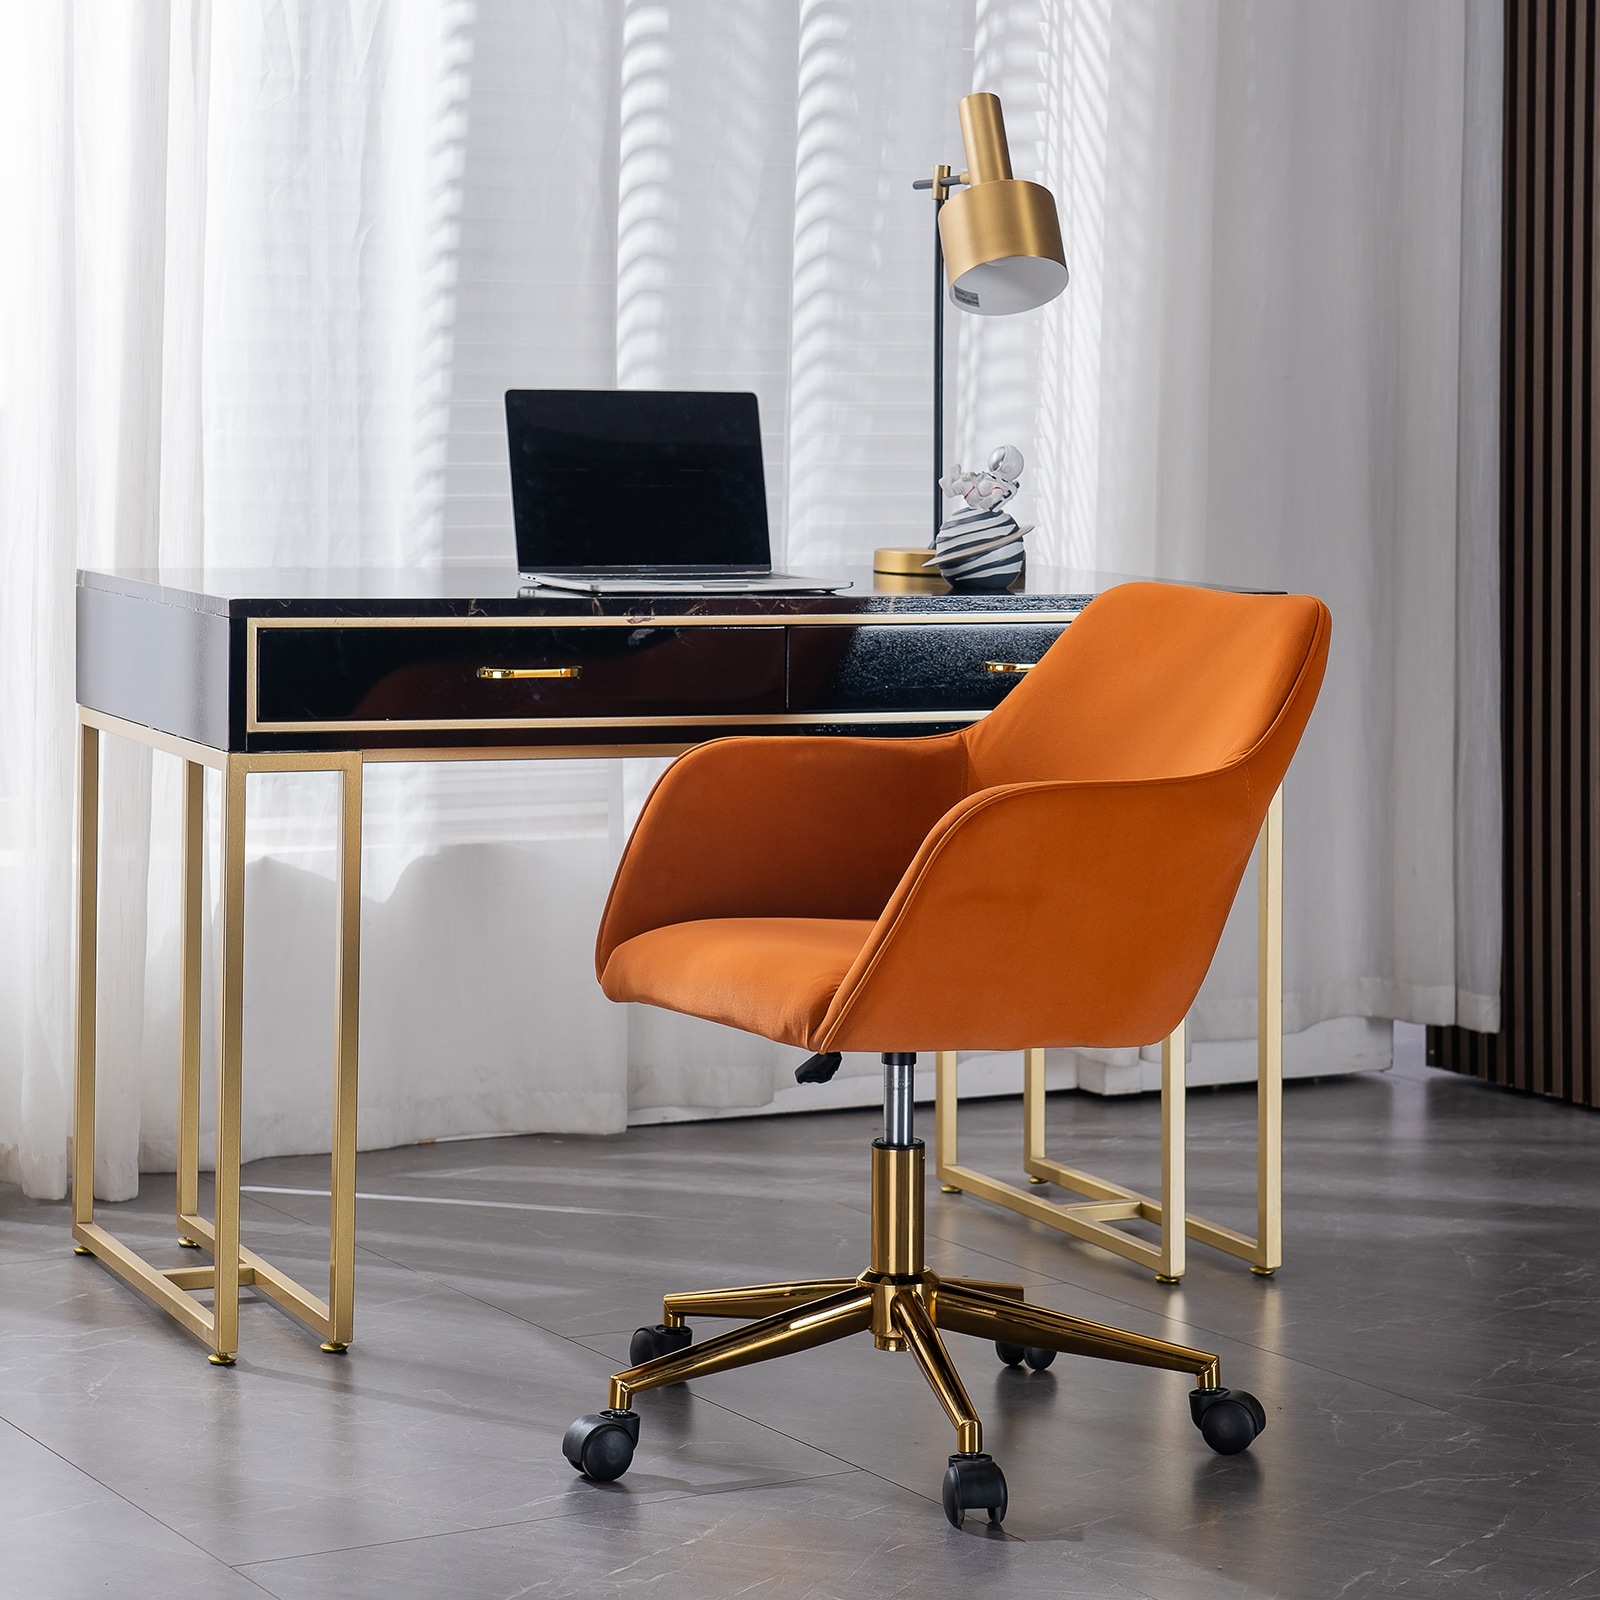 https://ak1.ostkcdn.com/images/products/is/images/direct/24e940ca884ffc317a8dec33fe6c7bd40bb330f8/Orange-Velvet-Adjustable-Height-360-Revolving-Home-Office-Chair%2C-with-Gold-Metal-Legs-and-Universal-Wheel.jpg